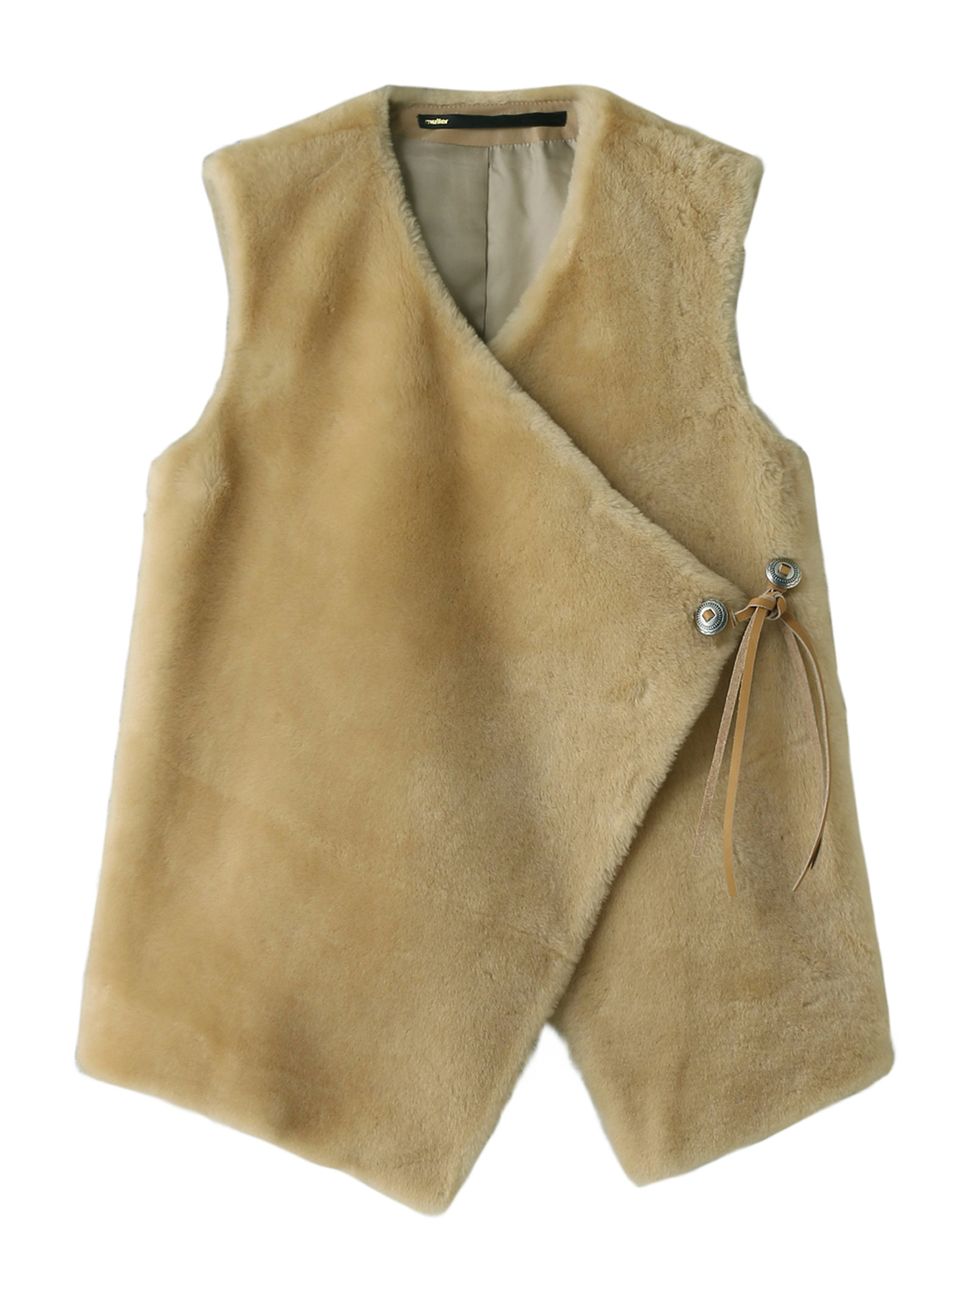 Clothing, Outerwear, Beige, Product, Khaki, Yellow, Vest, Tan, Sleeve, Collar, 